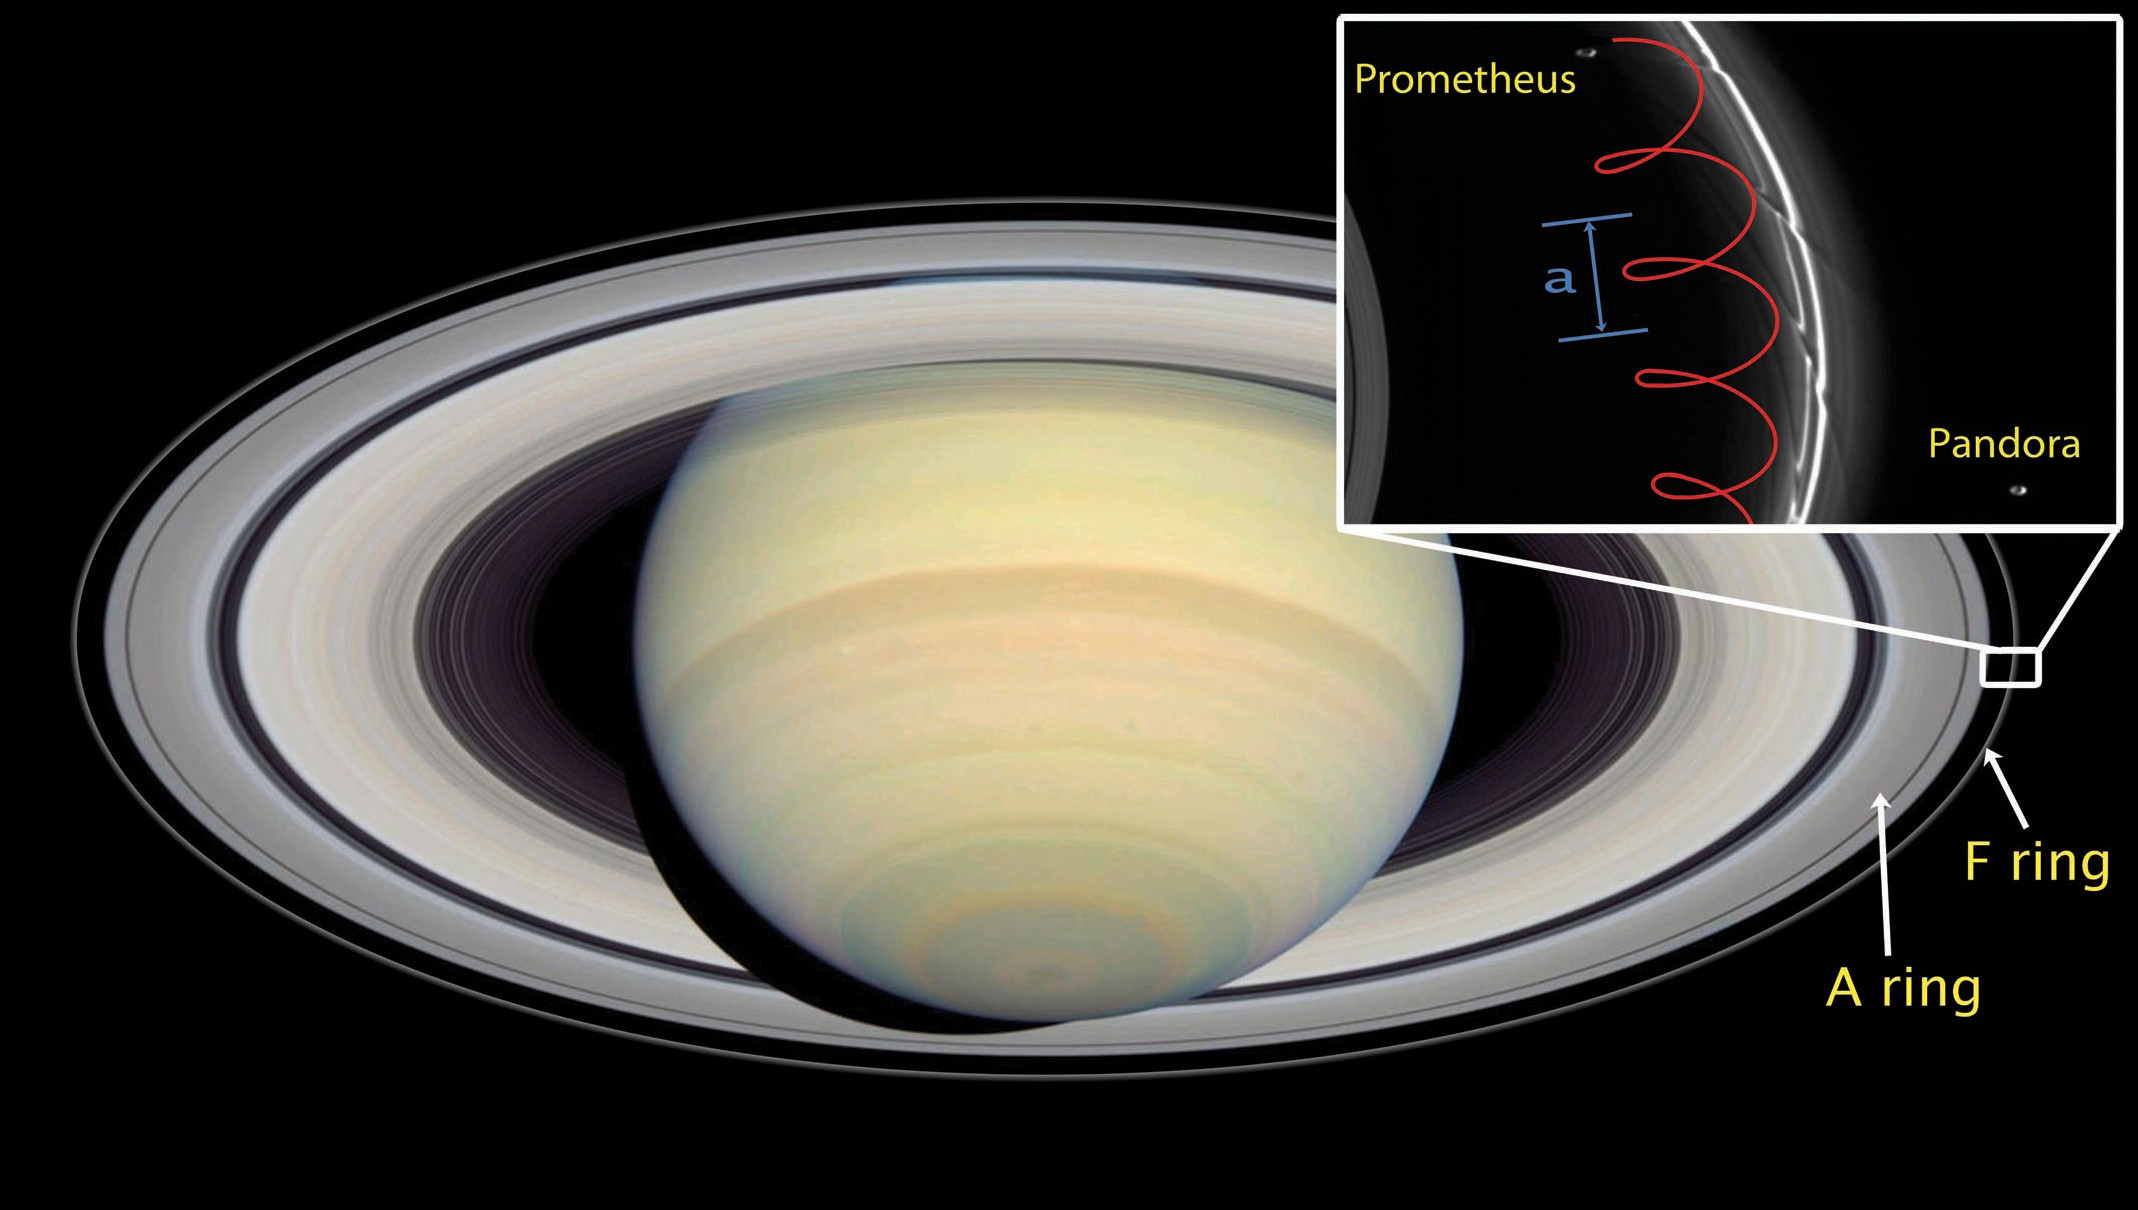 Why Saturn's rings will disappear from view in the next couple of years